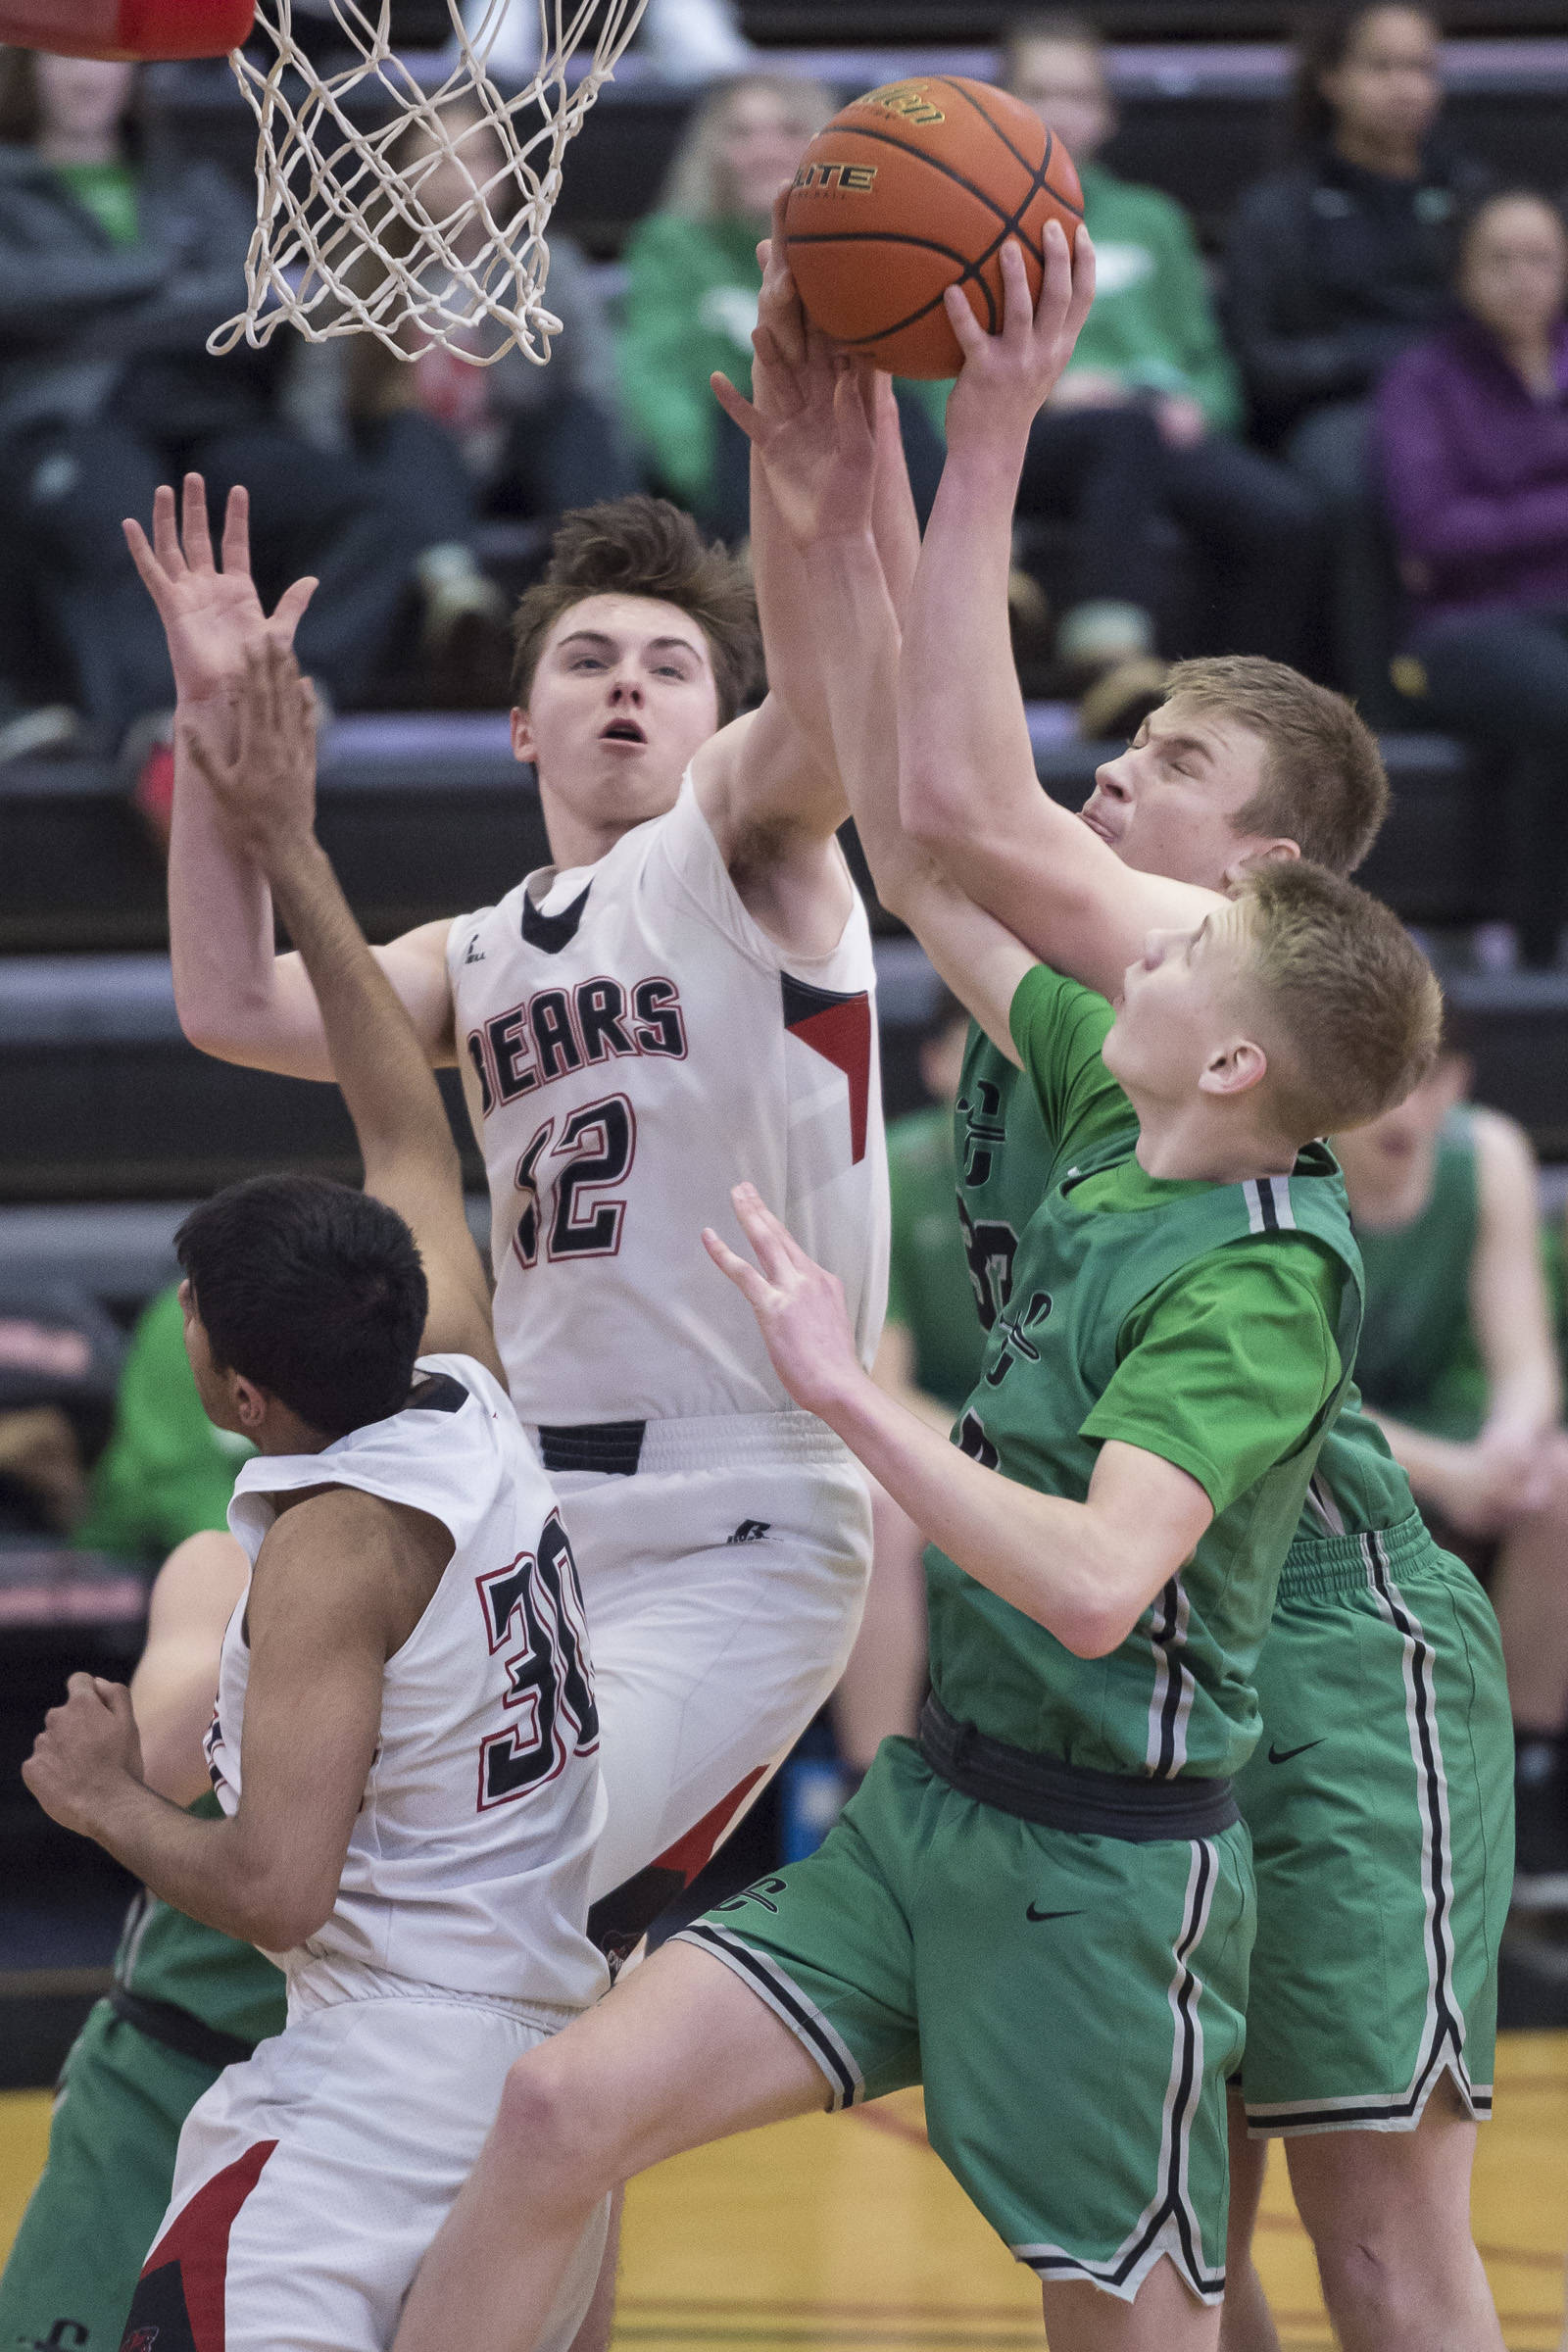 Juneau-Douglas’ Brock McCormick, left, goes up for a rebound against Colony’s Wyatt Baker and Colton Spencer at JDHS on Thursday, Jan. 10, 2019. Colony won 66-40. (Michael Penn | Juneau Empire}